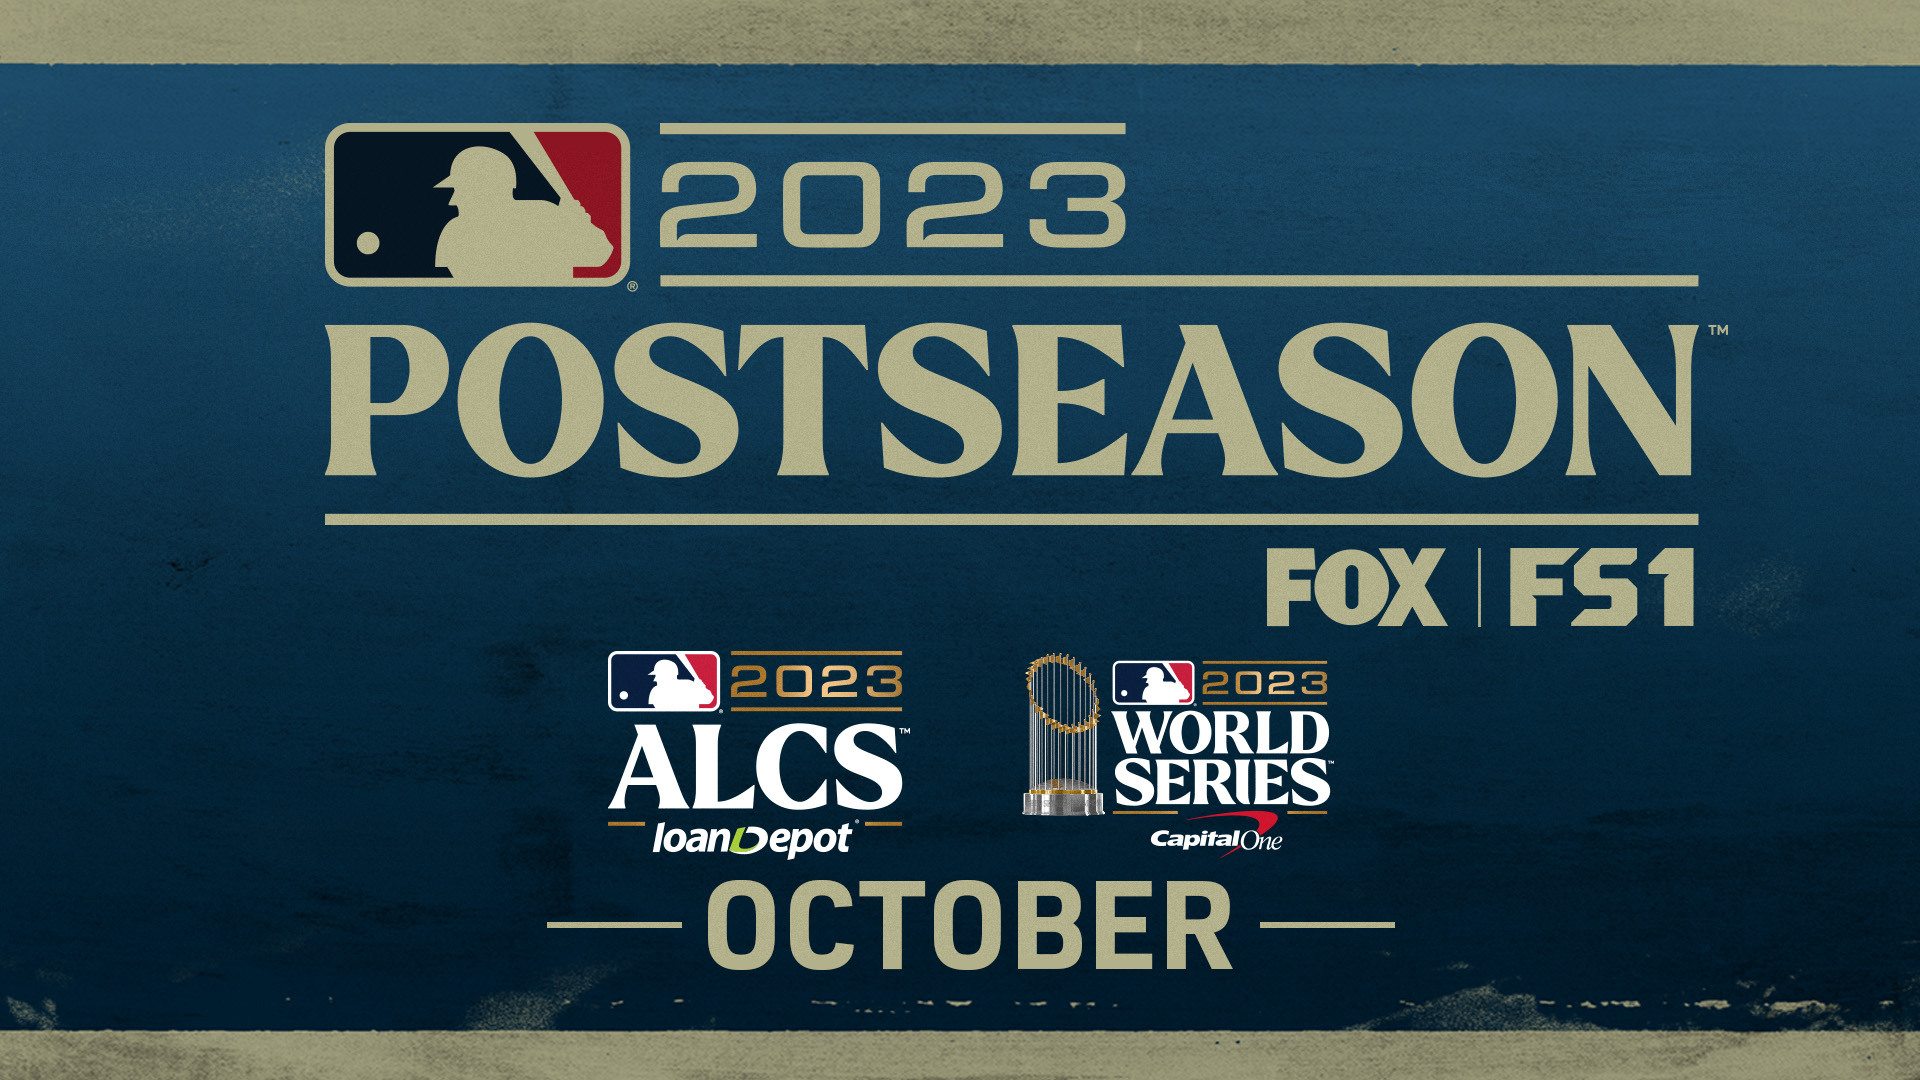 How to Watch the MLB Playoffs on October 21 - Philadelphia